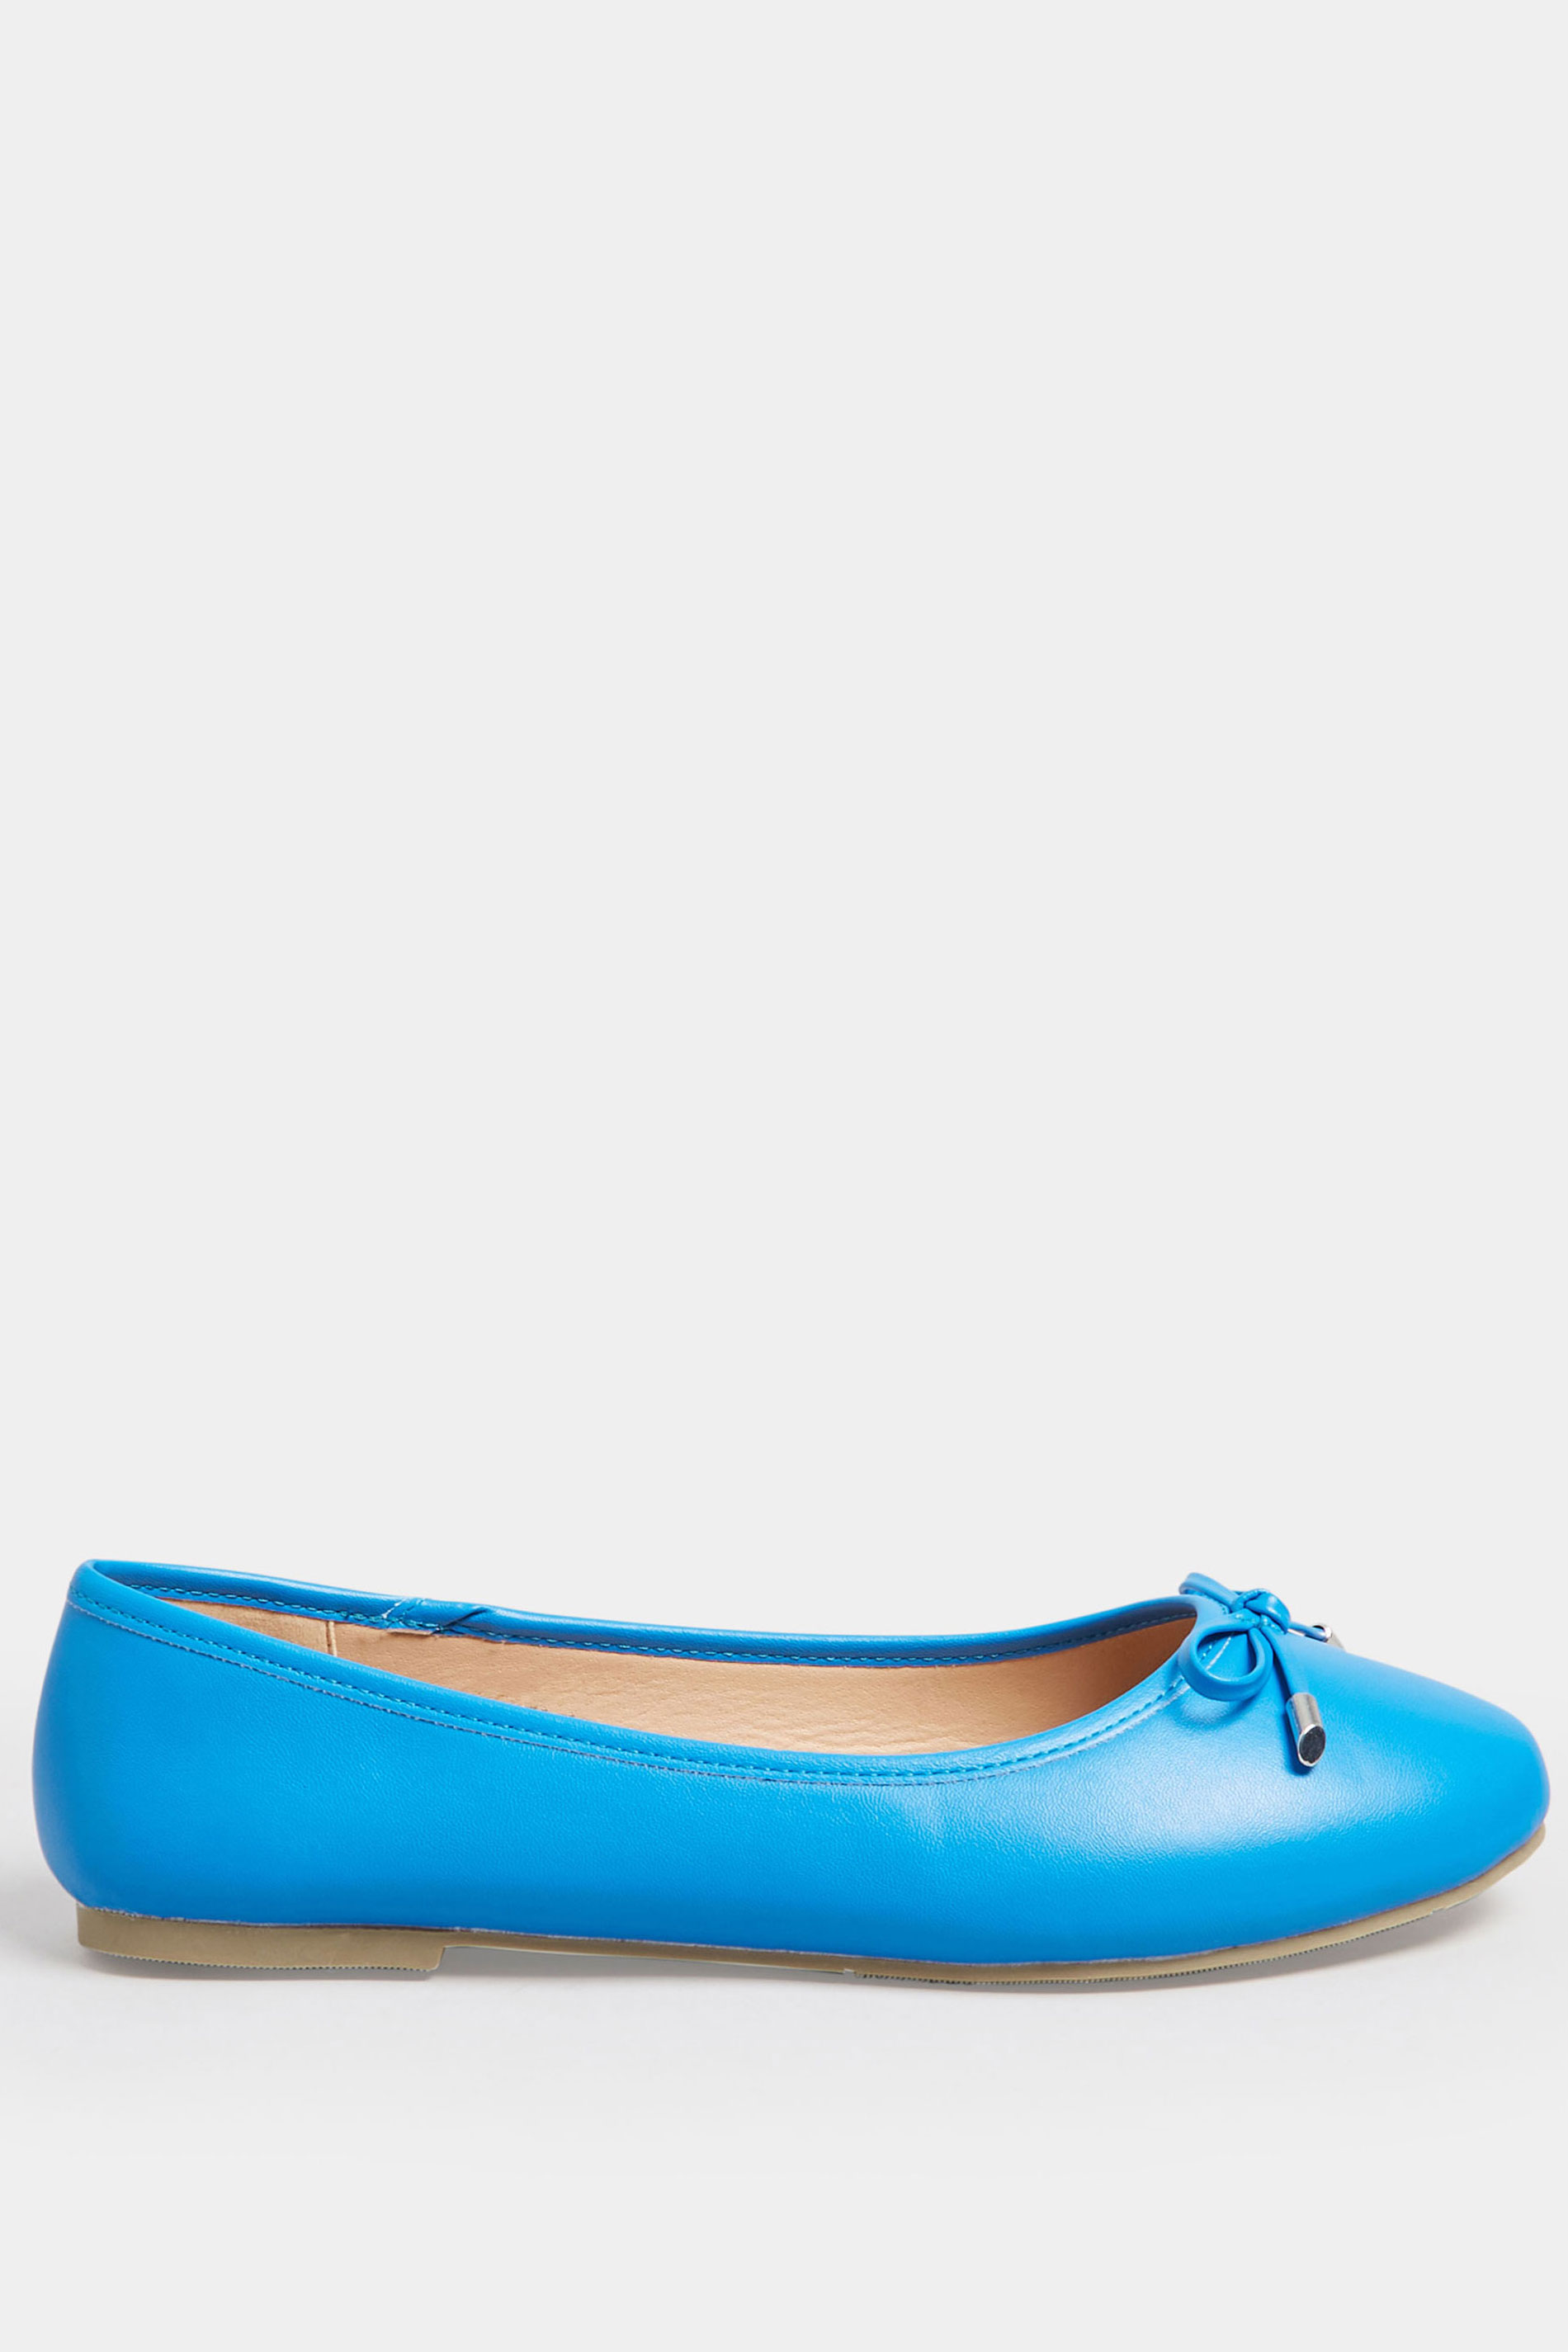 Blue Ballerina Pumps In Wide E Fit & Extra Wide EEE Fit | Yours Clothing 3